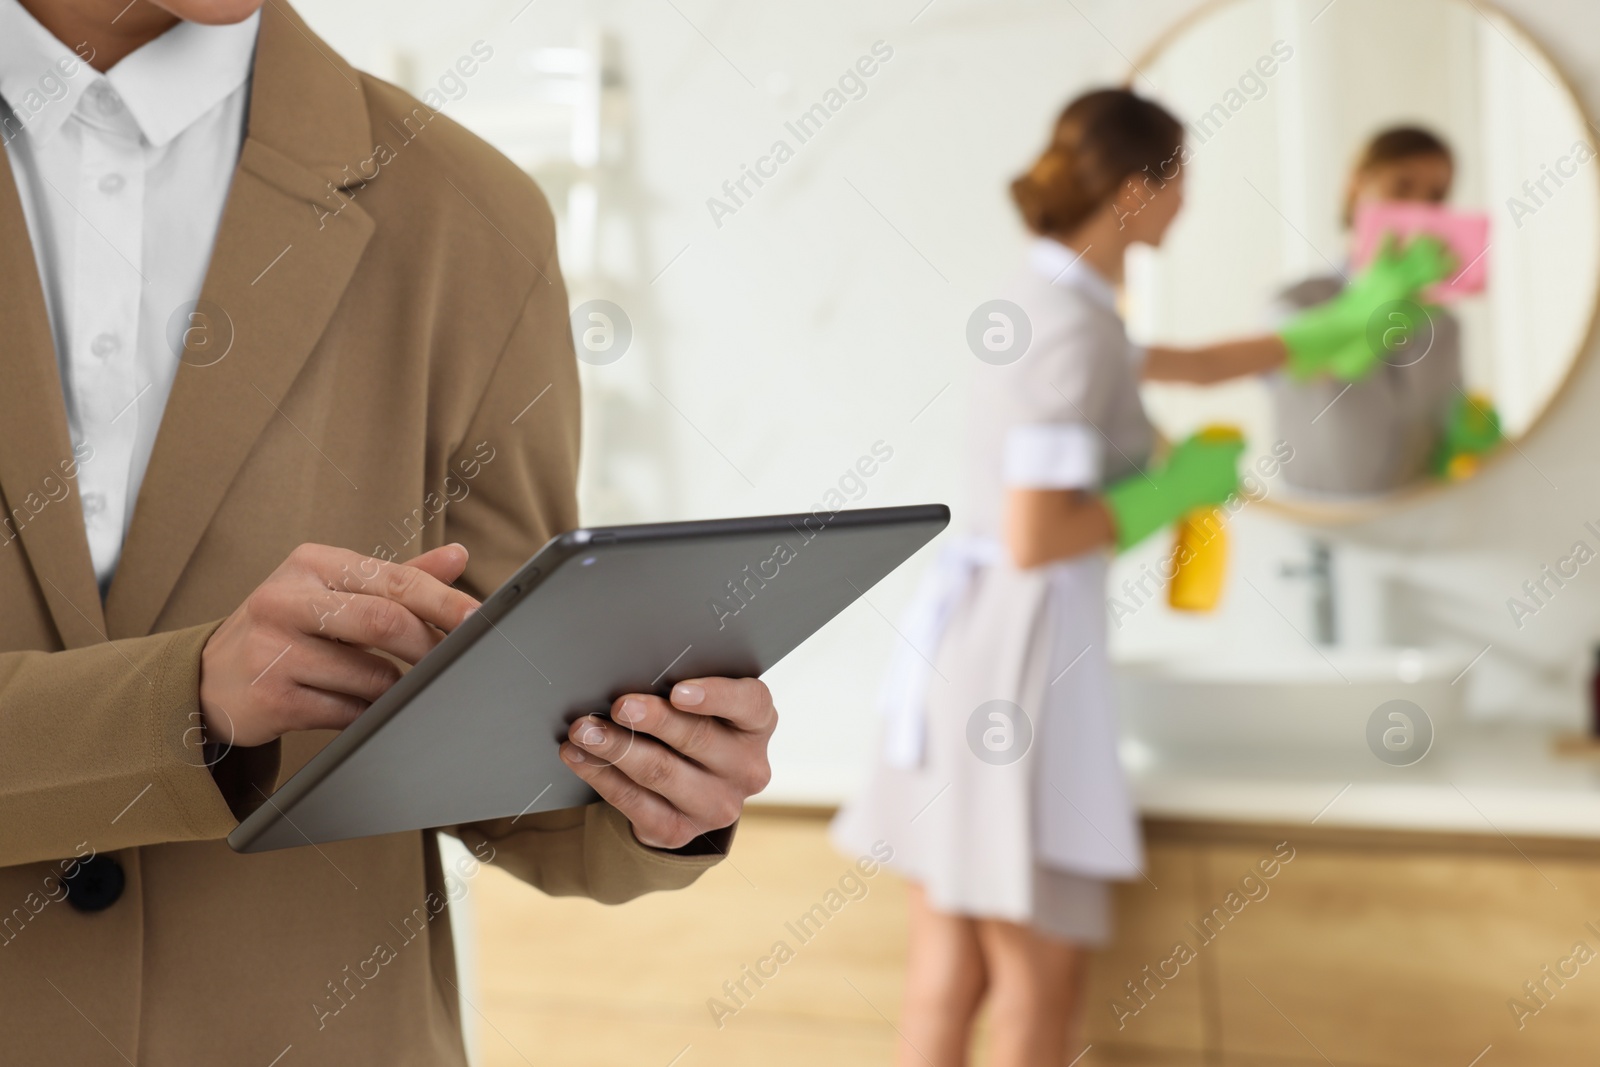 Photo of Housekeeping manager with tablet checking maid's work in hotel bathroom, closeup